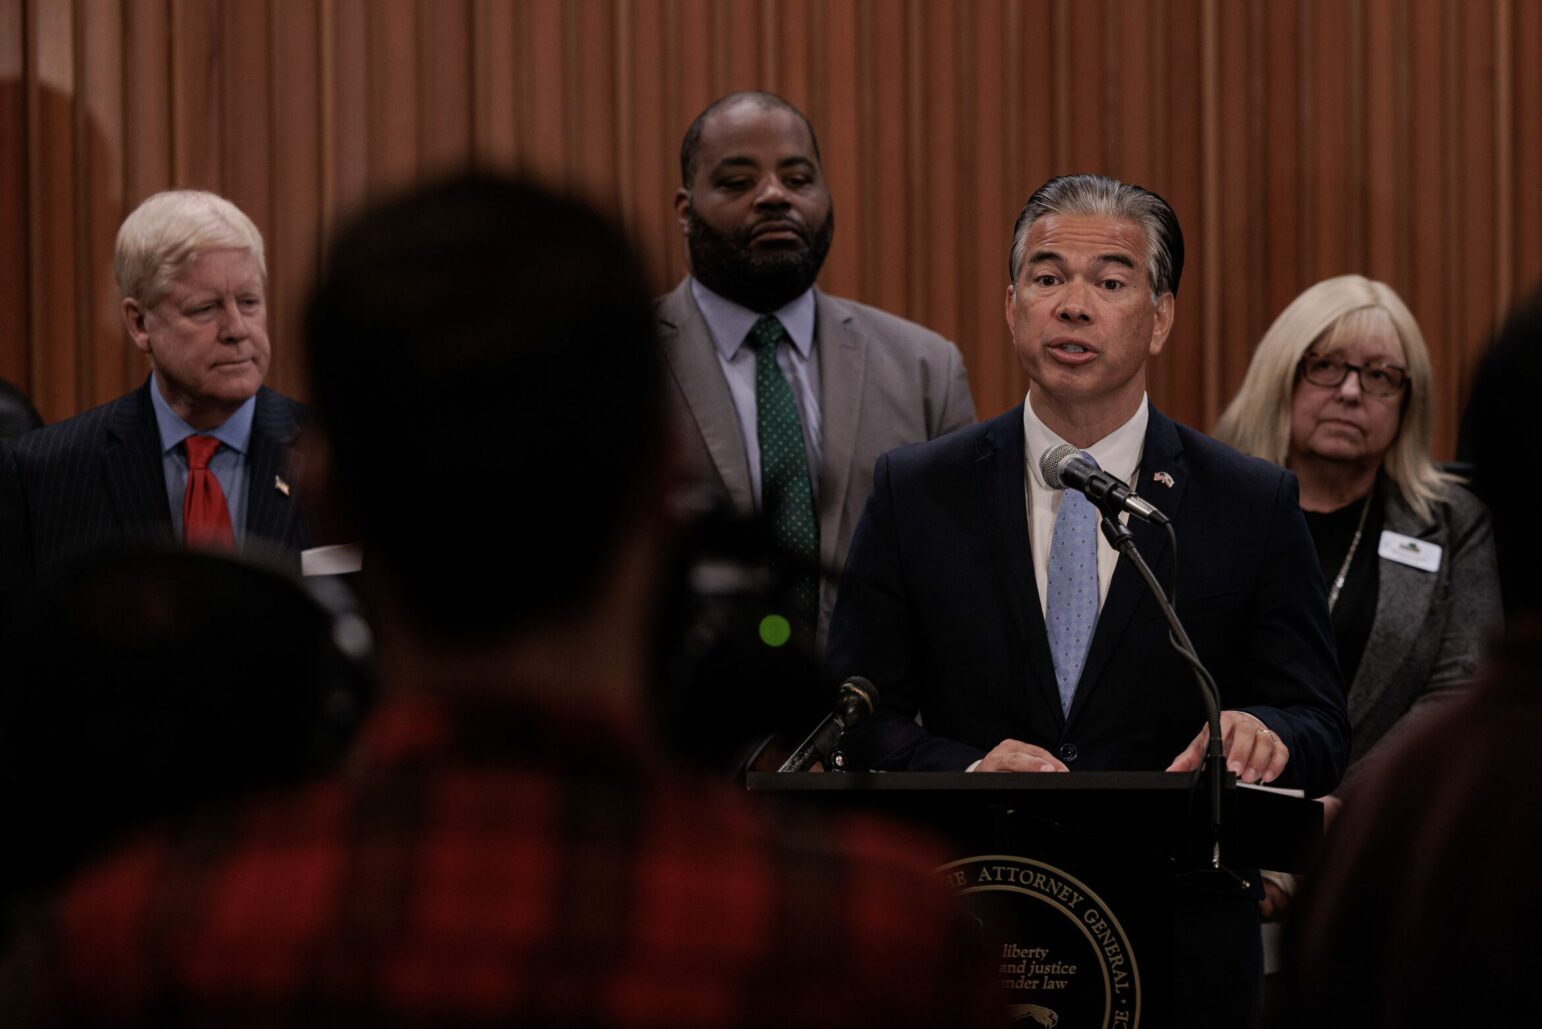 California Attorney General Rob Bonta speaks to reporters at a lectern inside Vallejo City Hall while surrounded by Vallejo officials and members of his senior leadership team.